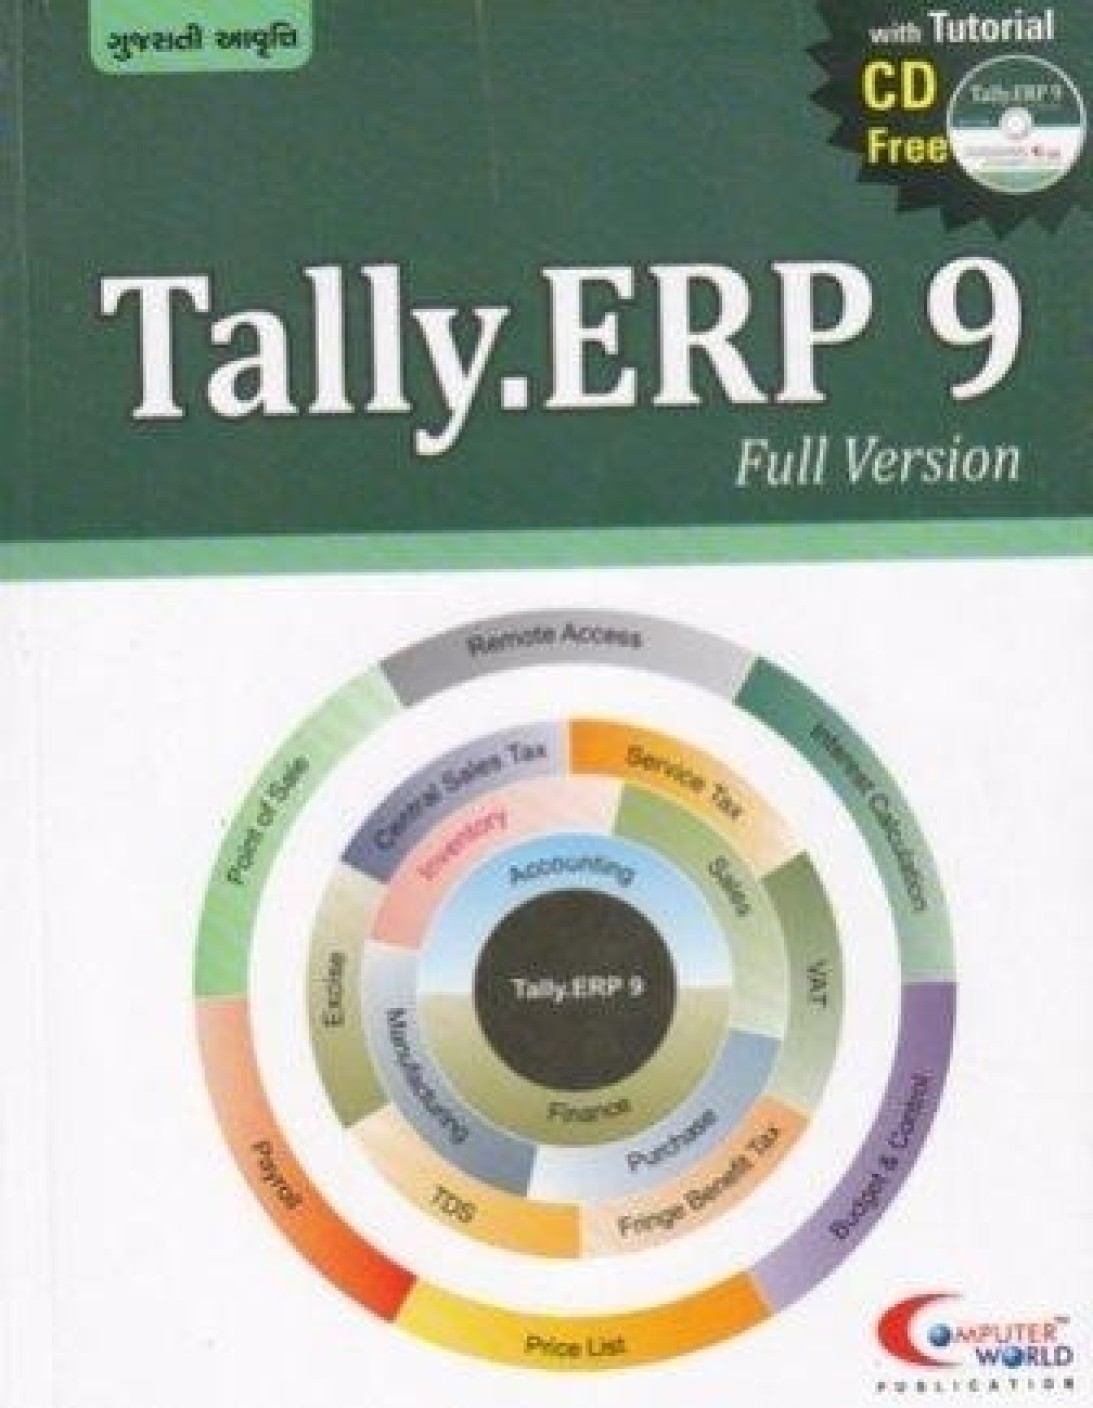 tally erp 9 educational version download